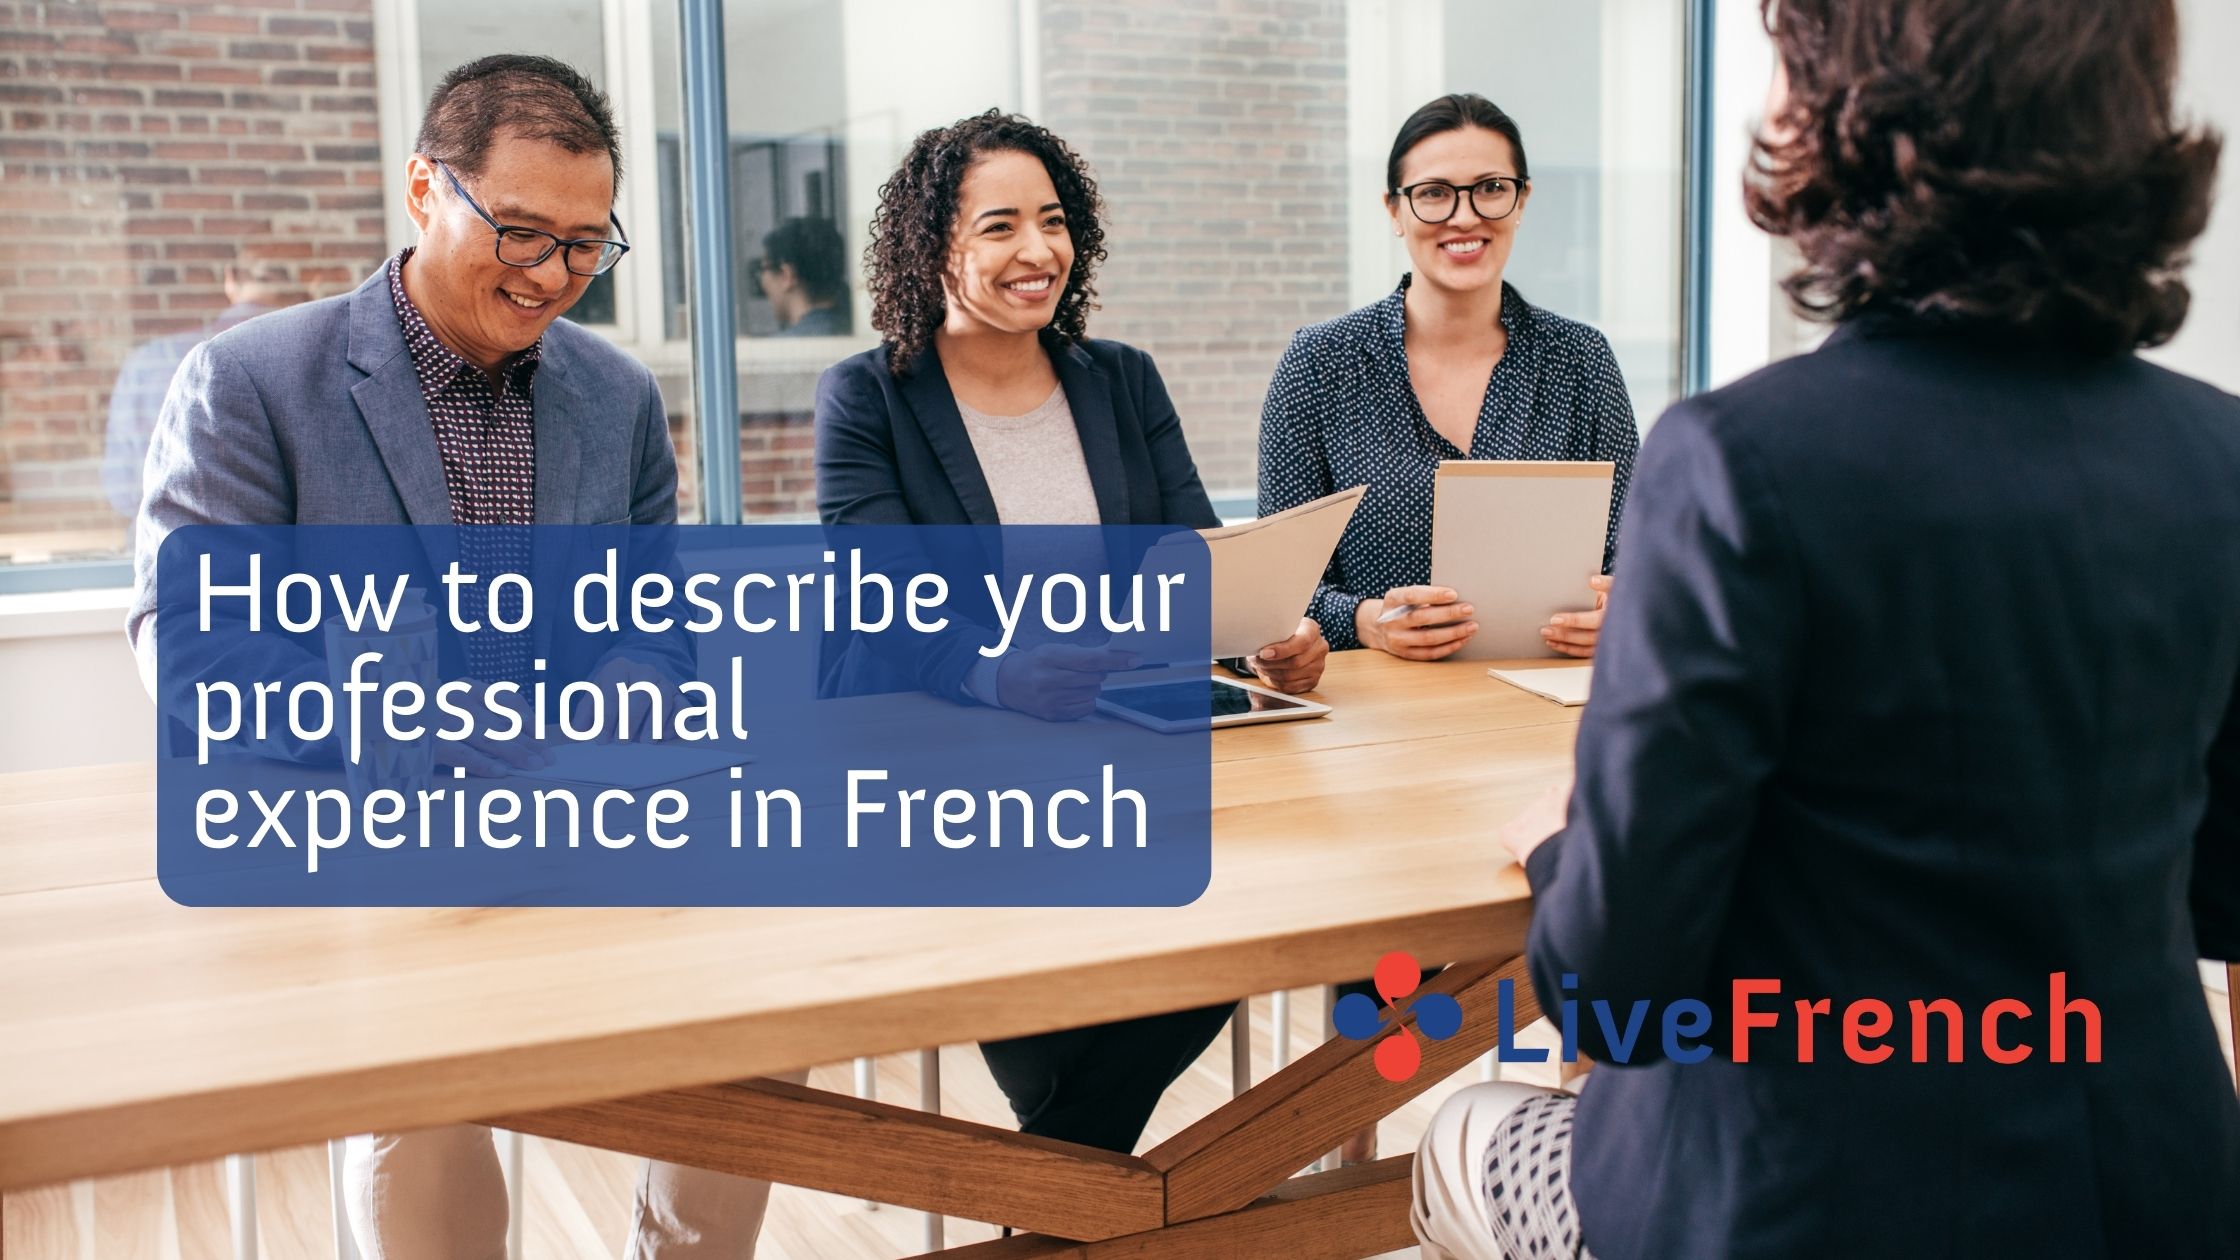 How to describe your professional experience in French during a job interview